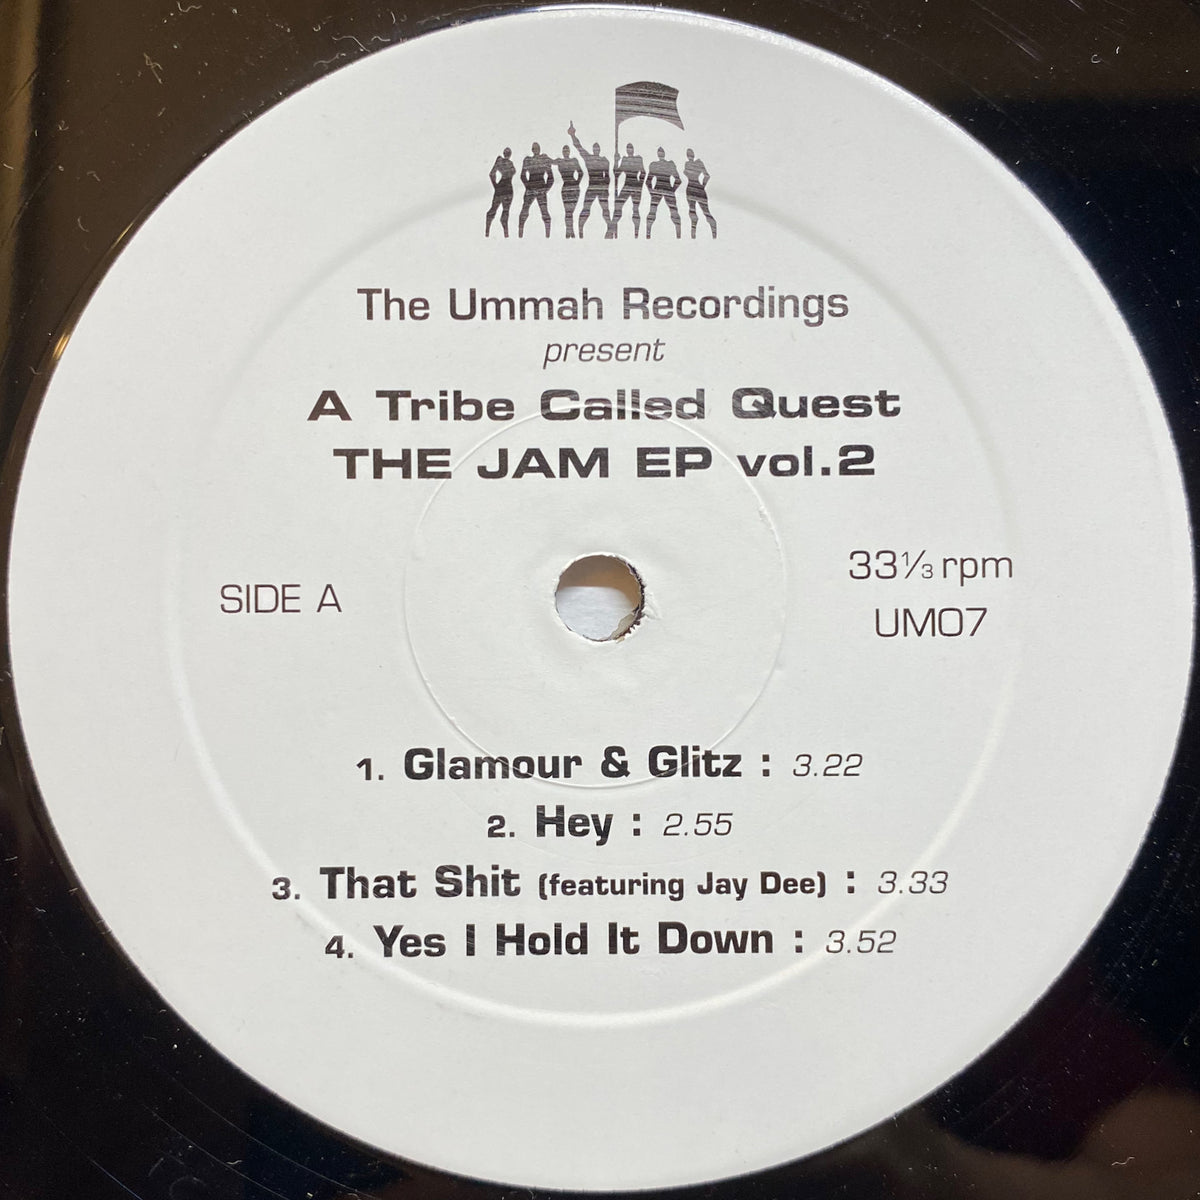 A Tribe Called Quest / The Jam EP Vol.2 | VINYL7 RECORDS